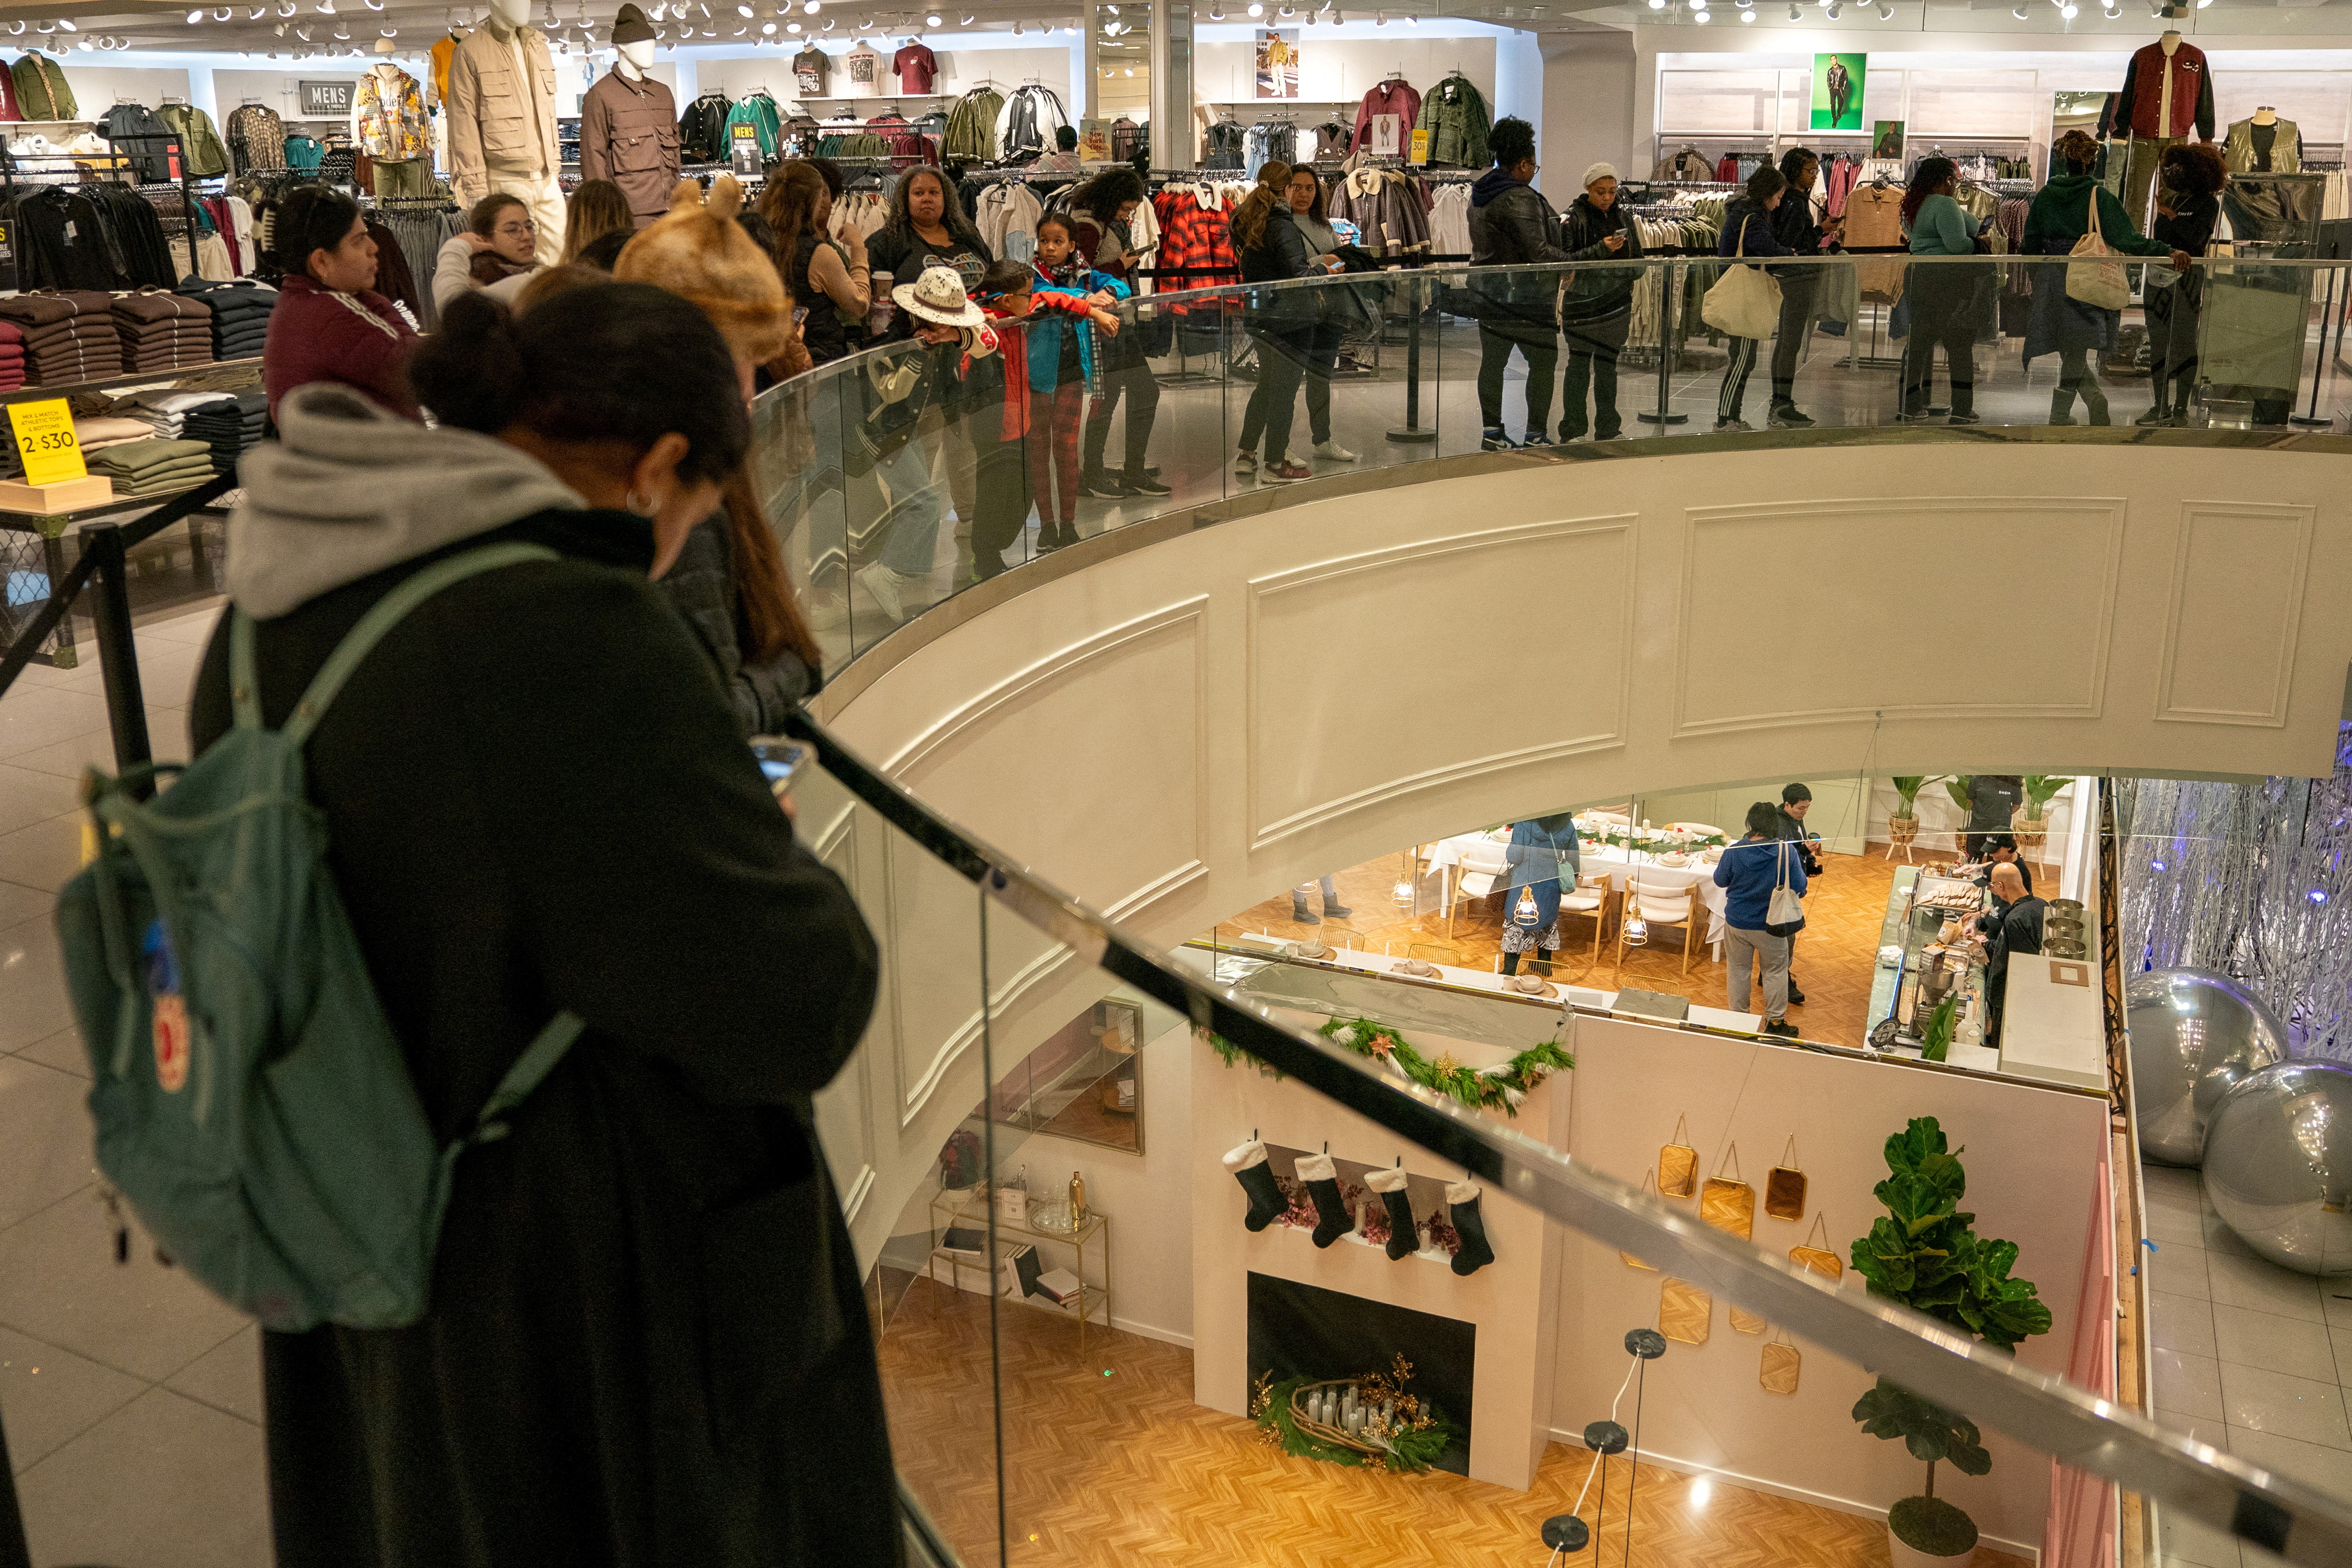 Black Friday shopping takeaways and what they mean for the economy